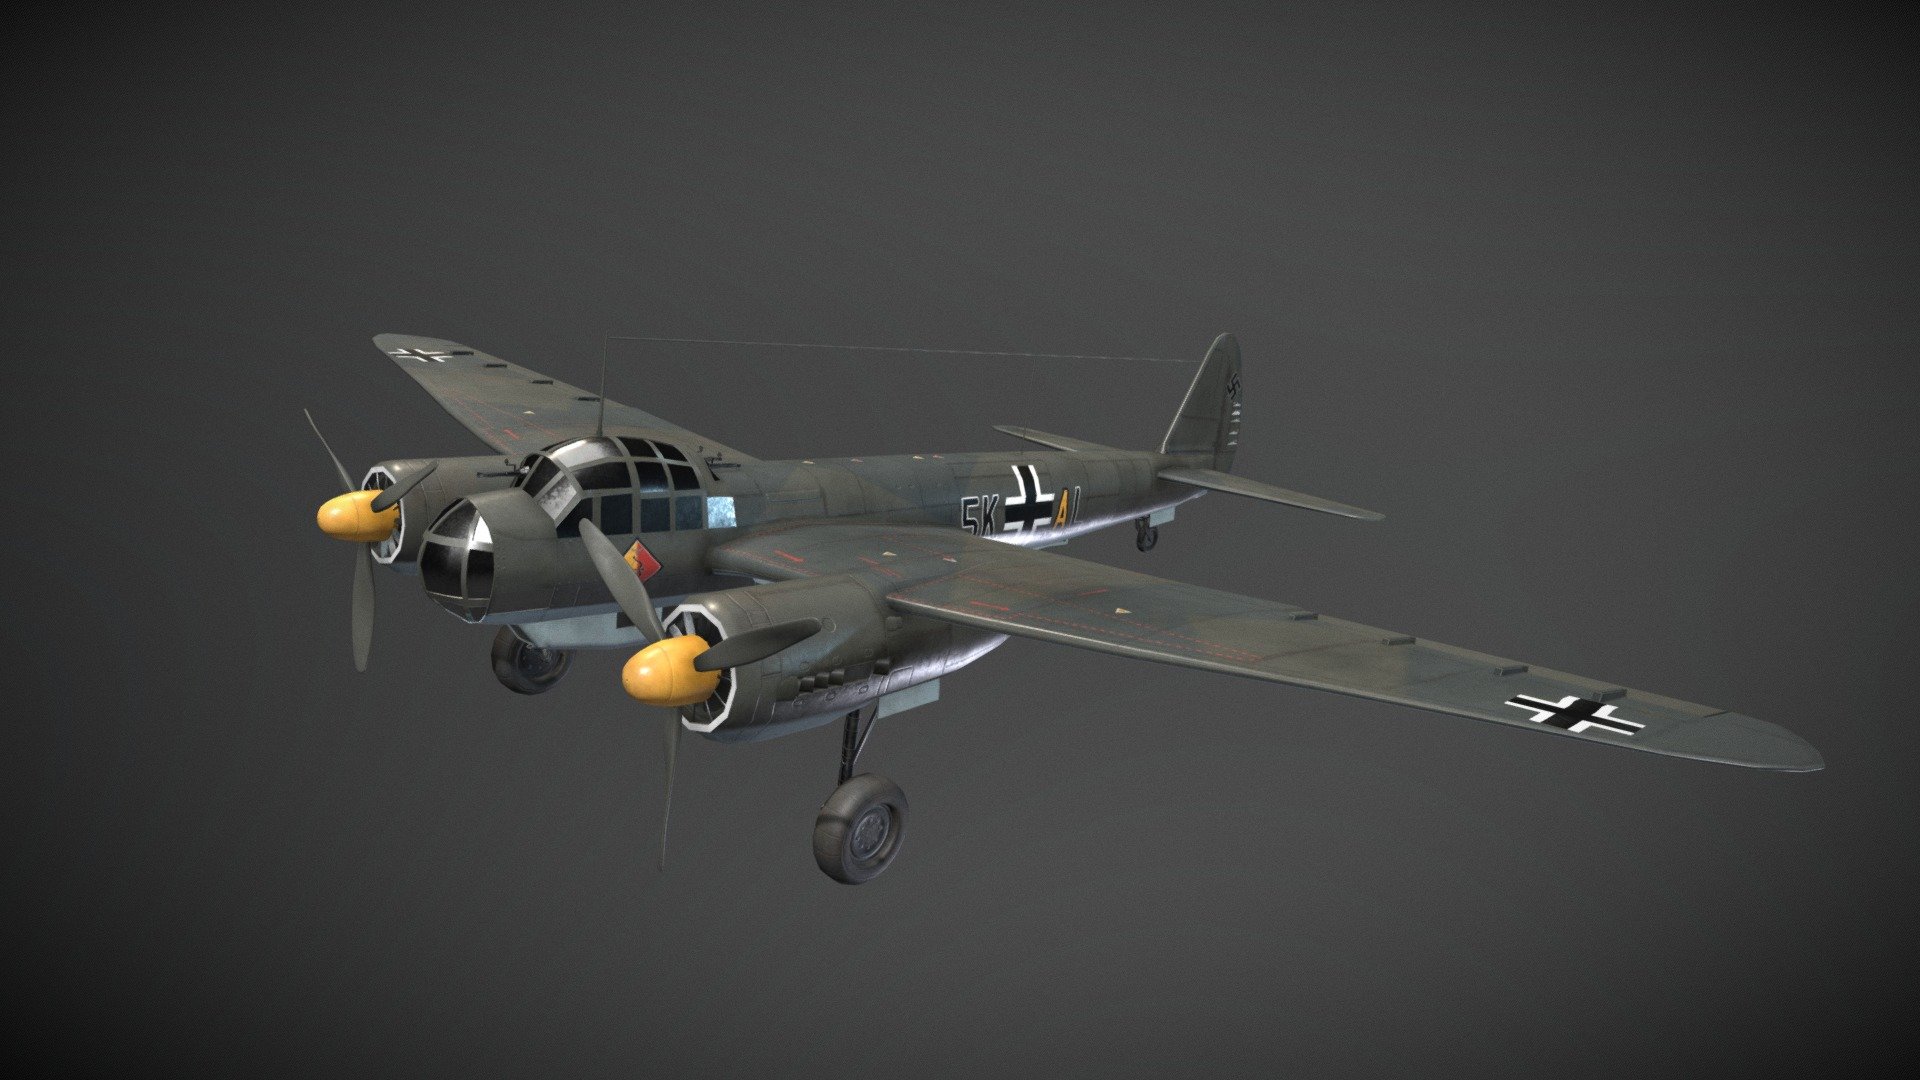 Created for a University client brief, a World War Two VR combat flight sim. This plane will act as a target for the player to hit. The plane has been modelled to be destructible in a basic way as well as have a few animated parts. The modelling was done in Maya, and the texturing was done in Substance Painter 3d model